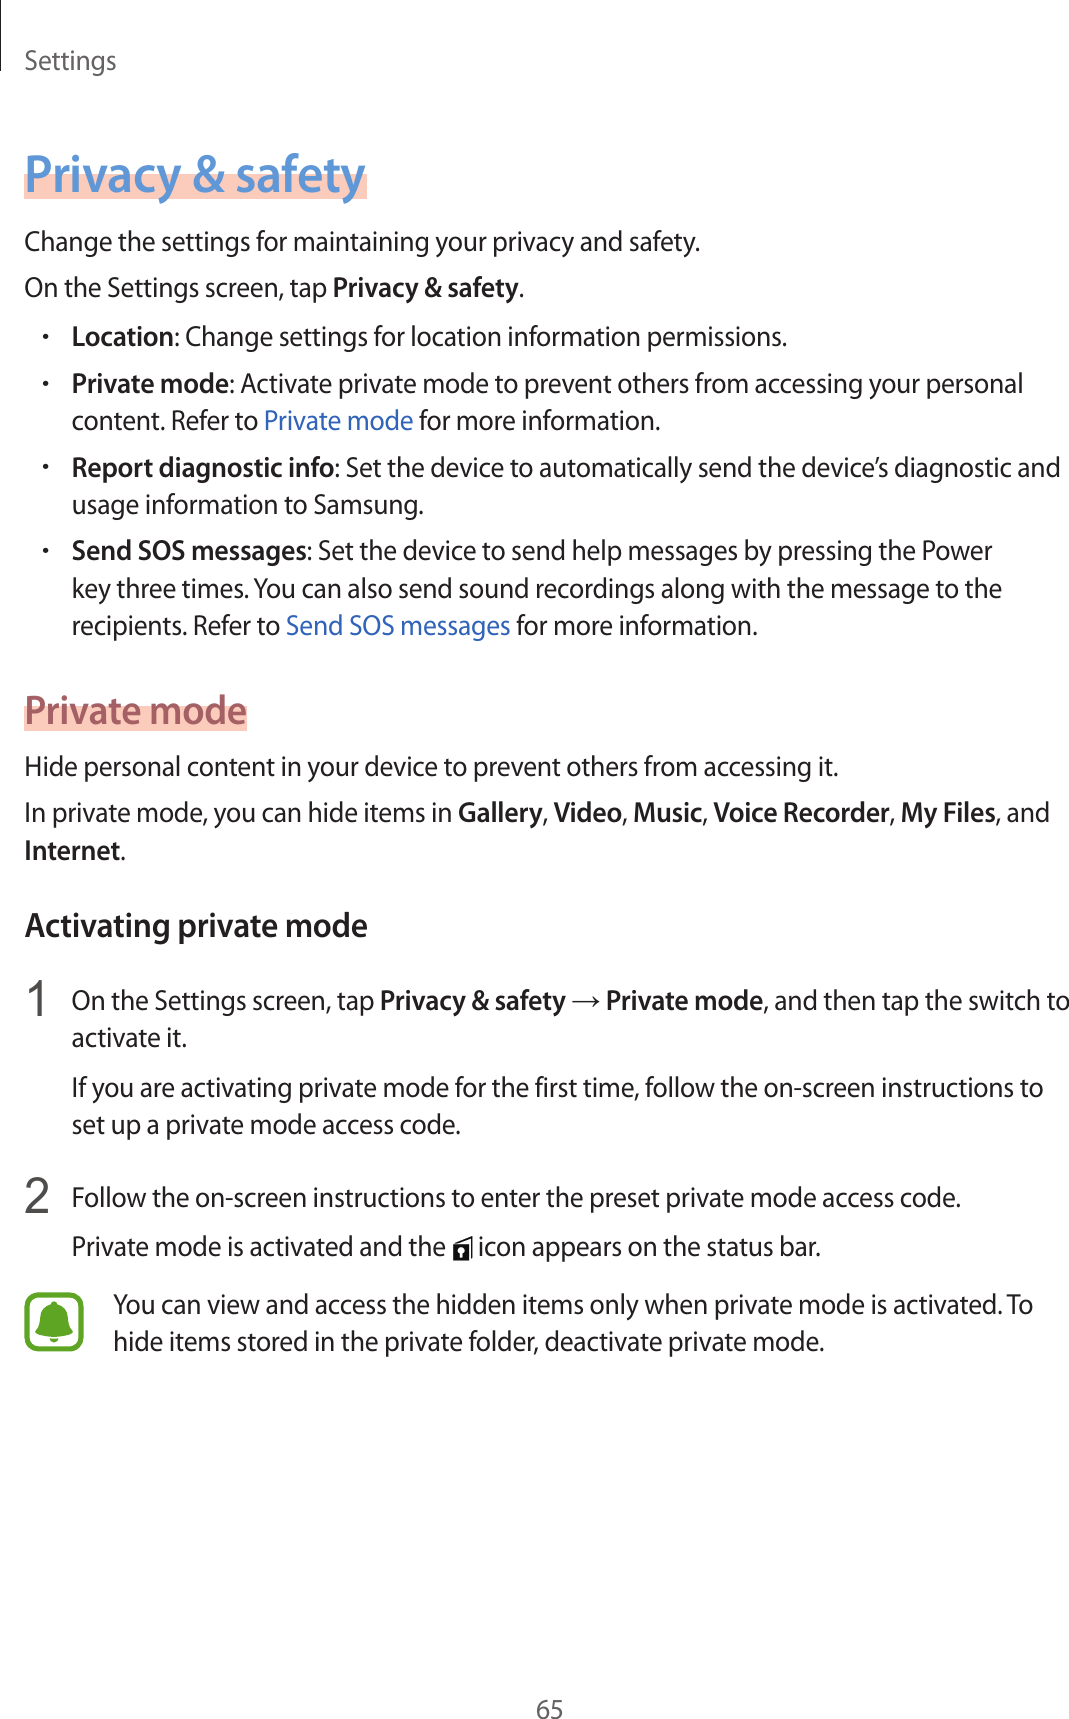 Settings65P rivacy &amp; safetyChange the settings for maintaining y our privacy and safety.On the Settings screen, tap Priv acy &amp; safety.•Location: Change settings for location information permissions.•Priv at e mode: Activate privat e mode t o pr ev ent others fr om ac cessing y our personal conten t. Ref er t o P riva te mode f or mor e information.•Report diagnostic info: Set the device to automatically send the devic e’s diagnostic and usage information t o Samsung .•Send SOS messages: Set the device to send help messages by pr essing the Power key three times . You can also send sound recordings along with the message t o the recipients . Ref er t o Send SOS messages for mor e information.Priv a te modeHide personal content in y our device t o pr ev ent others fr om ac c essing it.In private mode, y ou can hide it ems in Gallery, Video, Music, Voice Recor der, My F iles, and Internet.Activating priv at e mode1  On the Settings screen, tap Priv acy &amp; safety → Priv at e mode, and then tap the switch to activate it.If you are activating private mode for the first time, follo w the on-scr een instructions to set up a private mode acc ess c ode .2  Follow the on-screen instructions to enter the pr eset privat e mode ac cess c ode .Priva te mode is activated and the   icon appears on the status bar.You can view and access the hidden items only when private mode is activated . To hide items stor ed in the privat e f older, deactivate private mode .